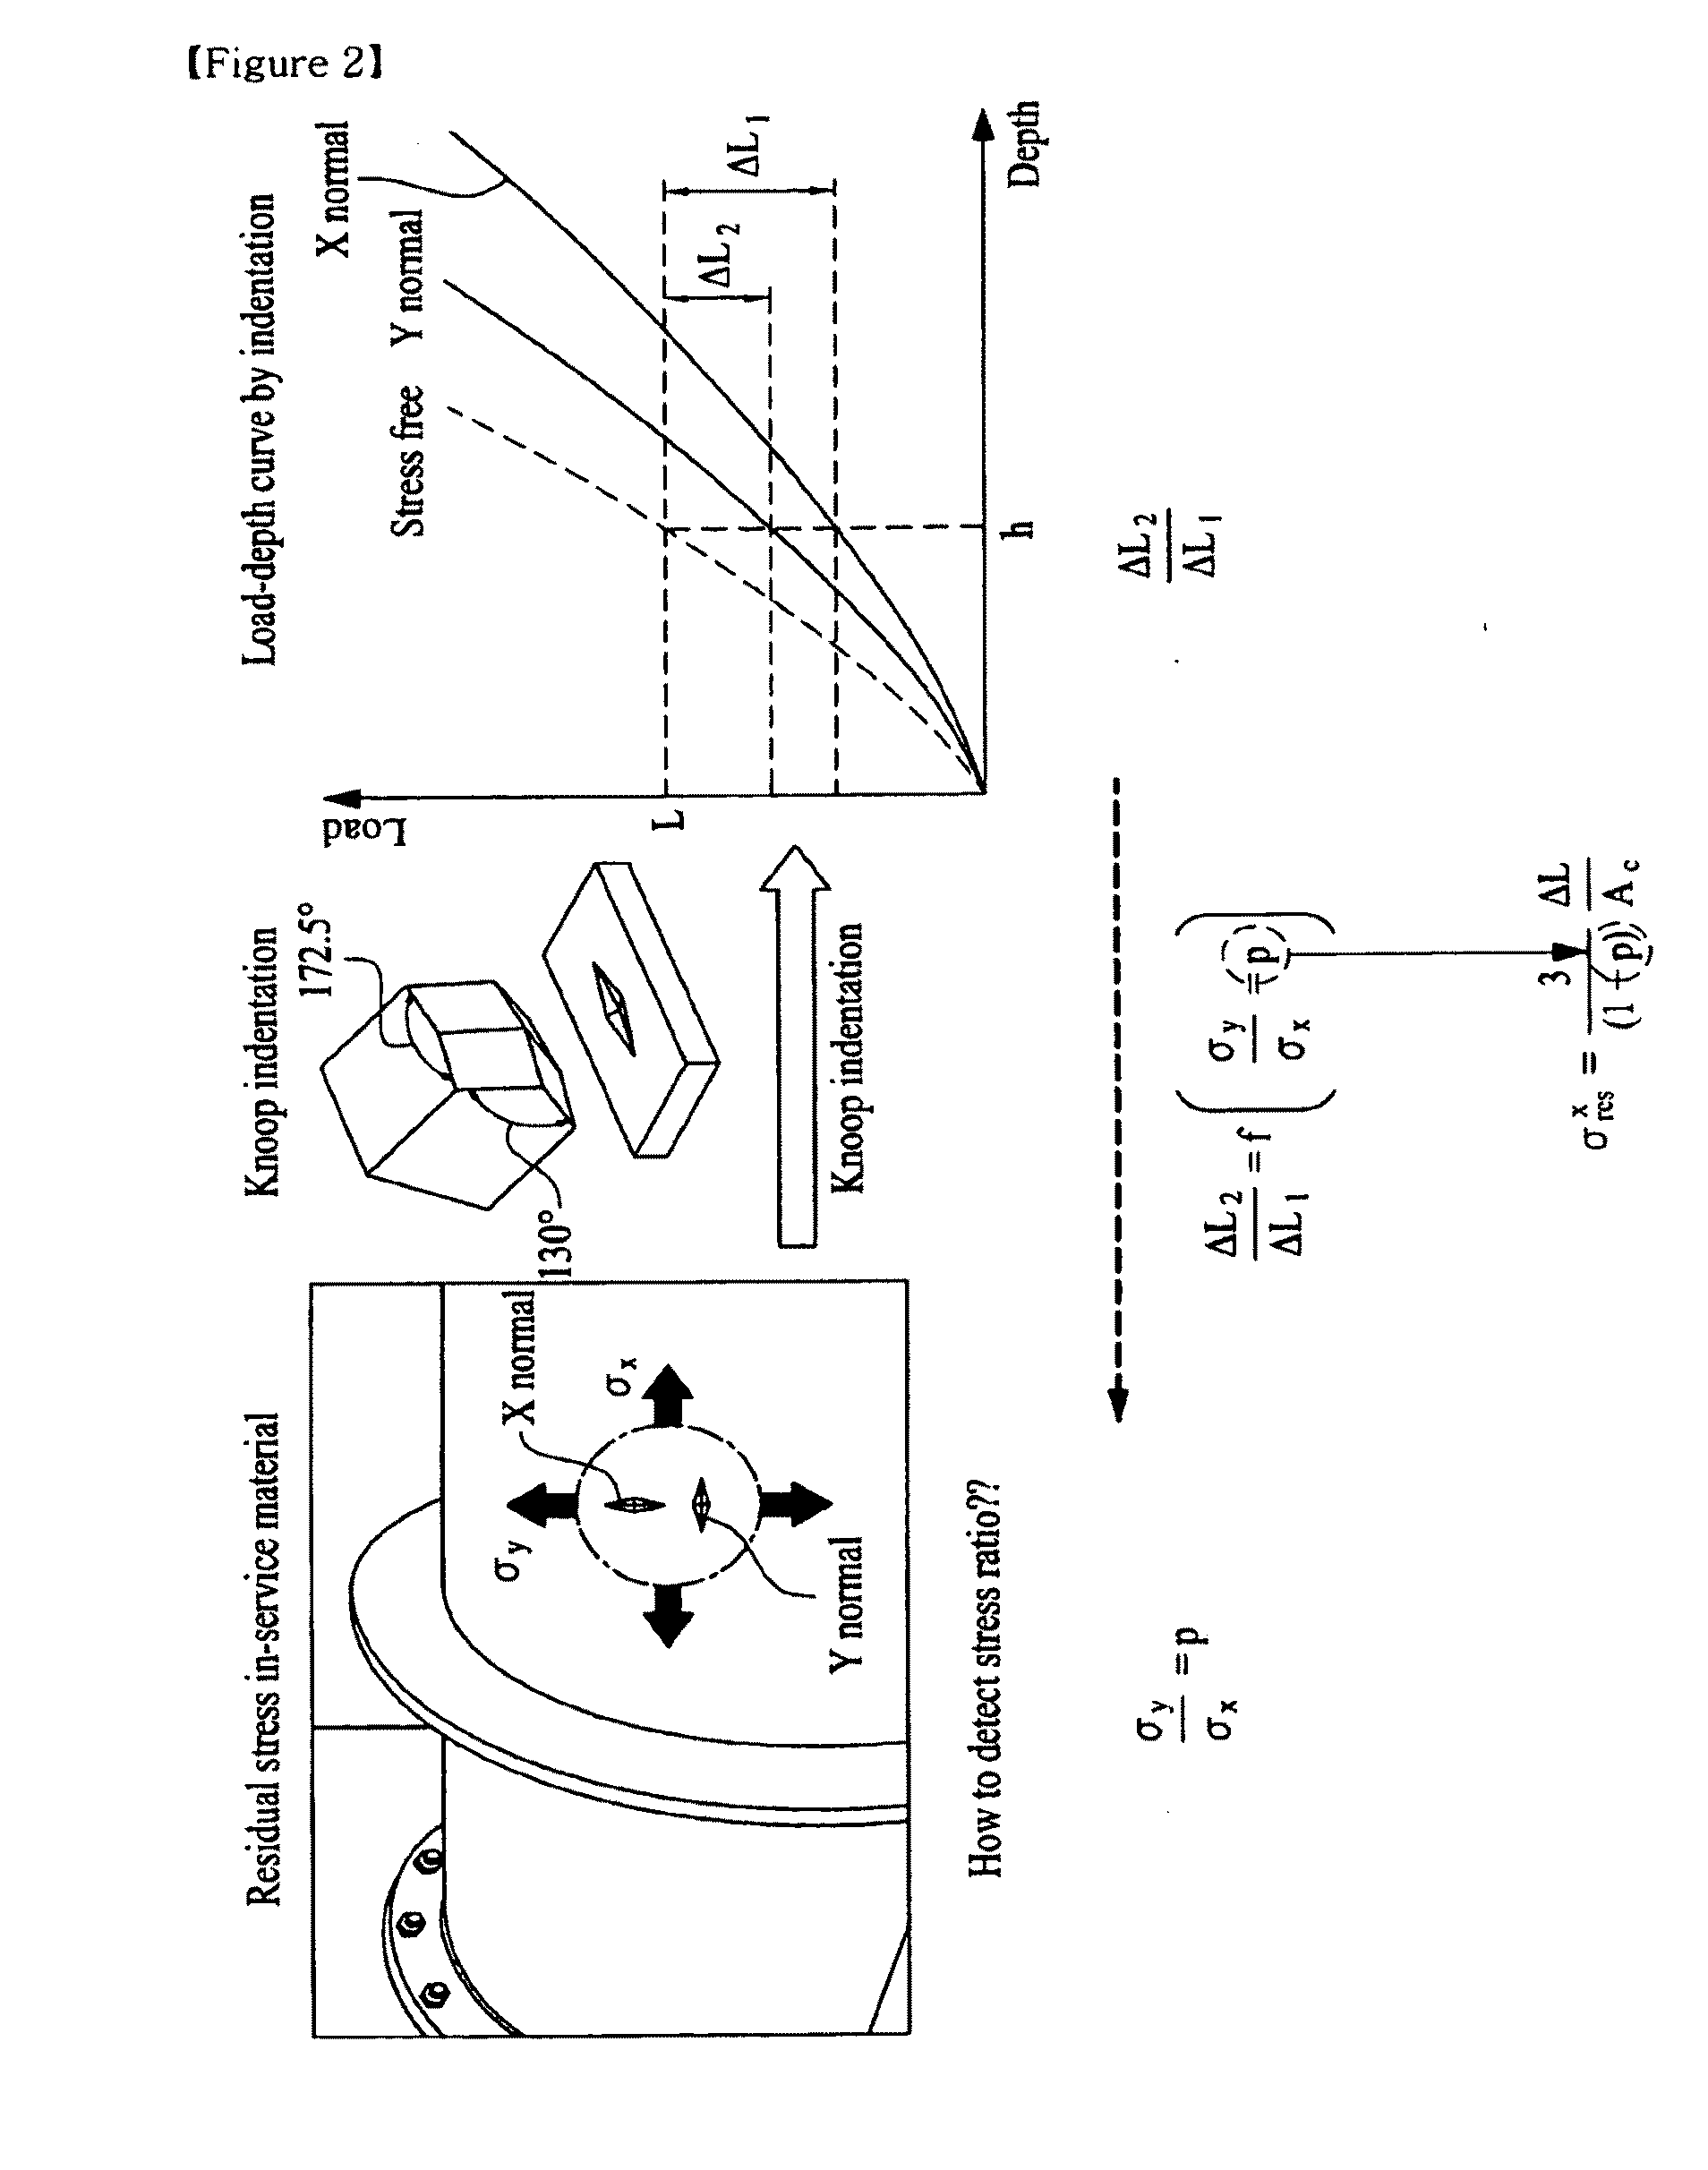 Estimation of non-equibiaxial stress using instrumented indentation technique